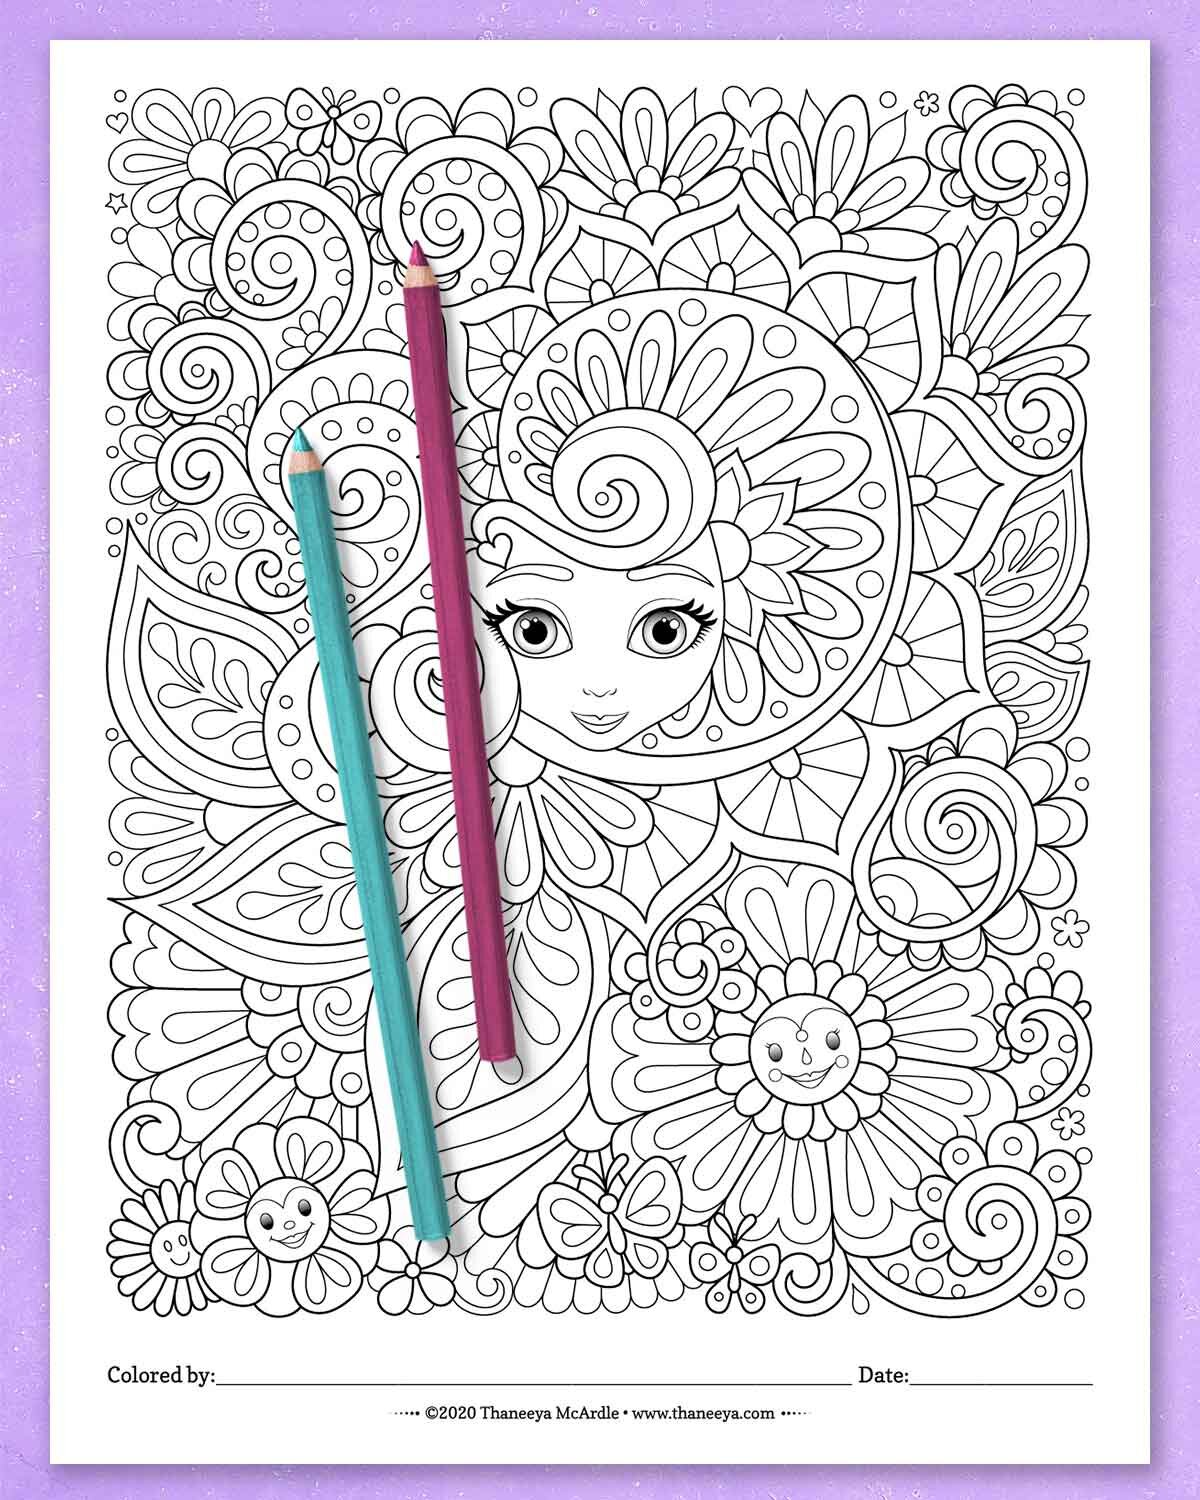 Color Fun Coloring Book by Thaneeya McArdle —